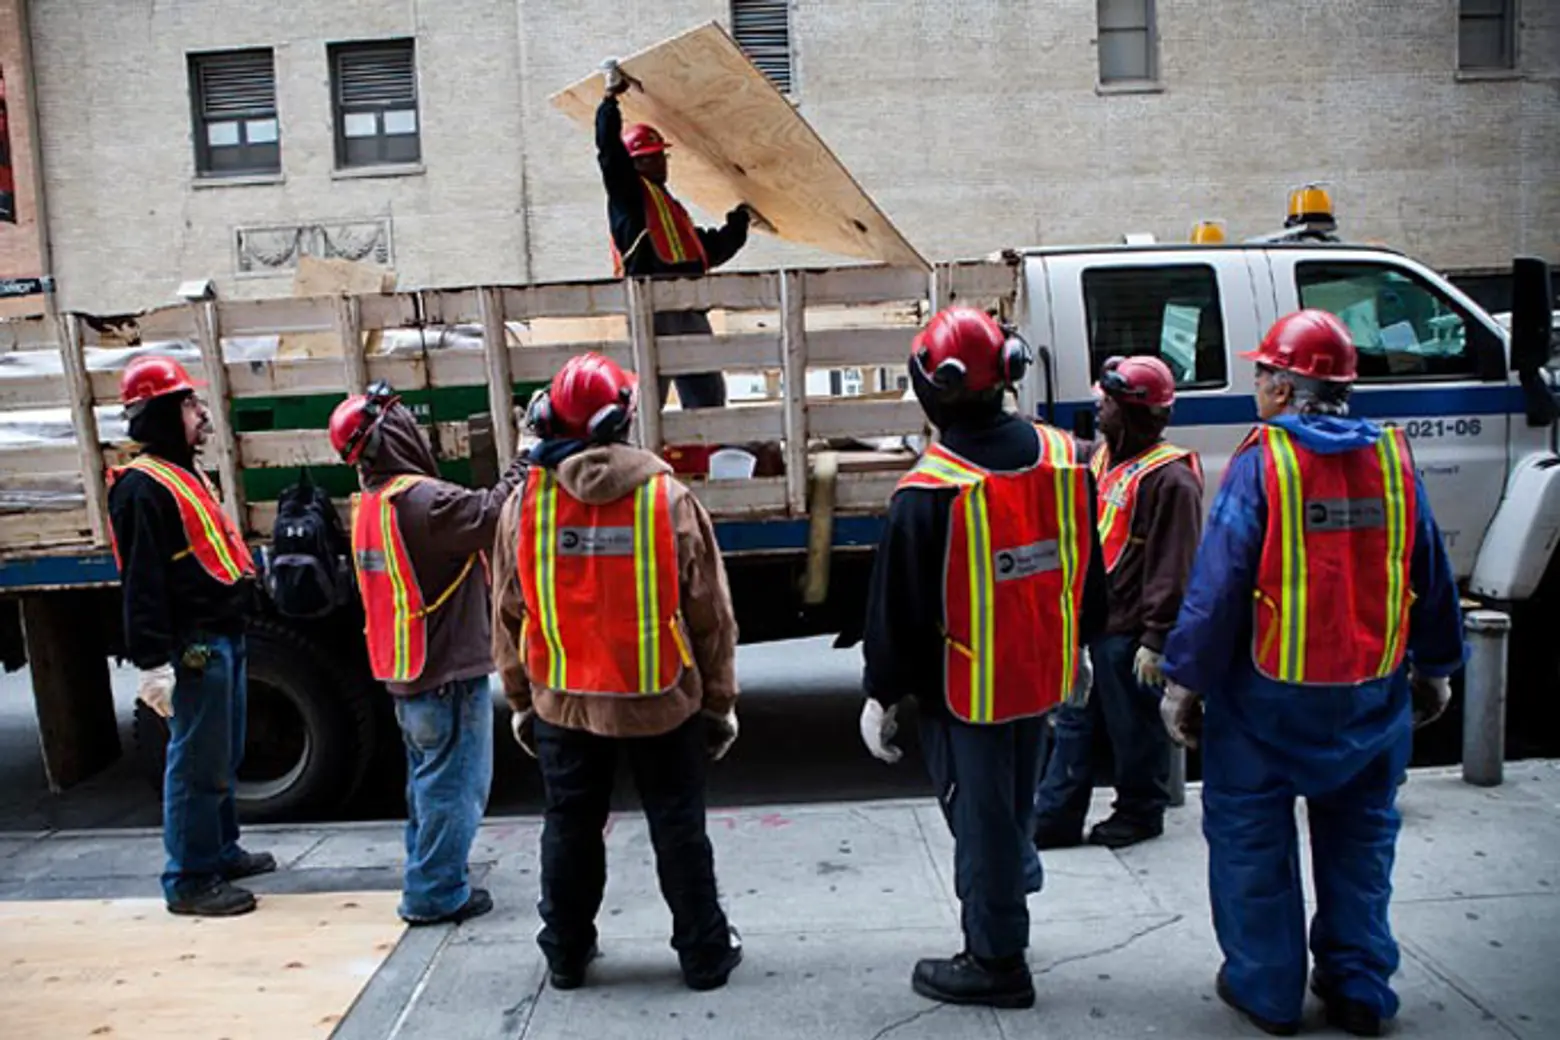 Construction Accidents Are Up in NYC; How an Apple Store’s Design Gets You to Spend Money